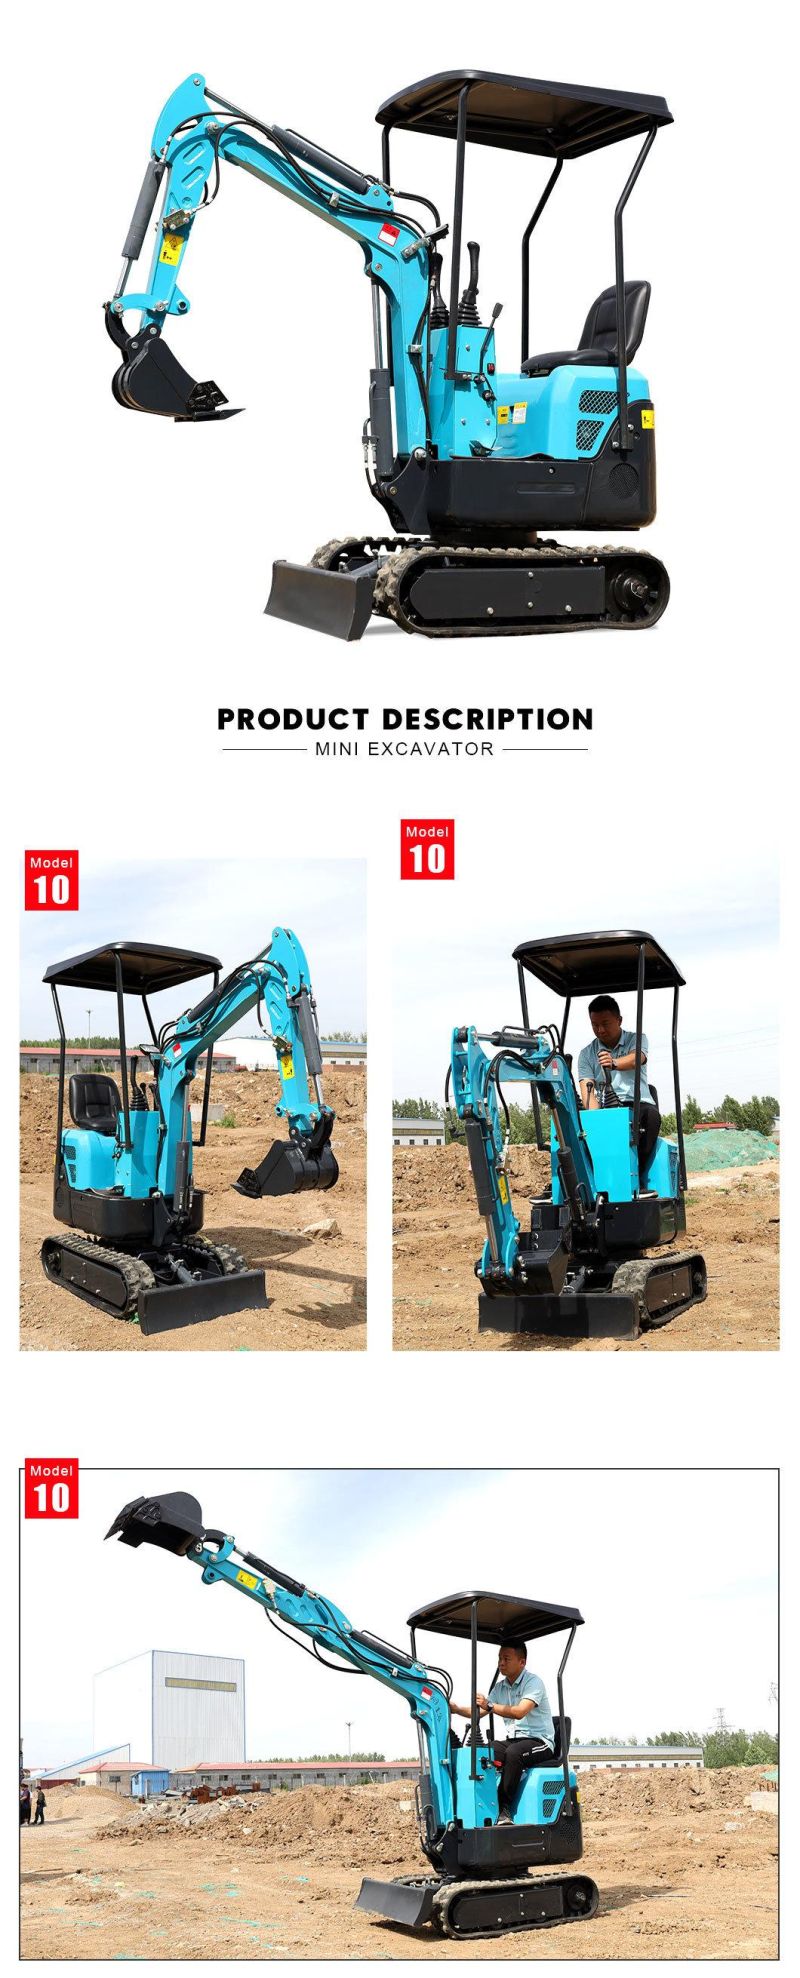 Jining Vote Vtw-10 New Mini Digger Hydraulic Mini Crawler Diesel Type Blue Small Excavator 1ton Price for Sale Hot